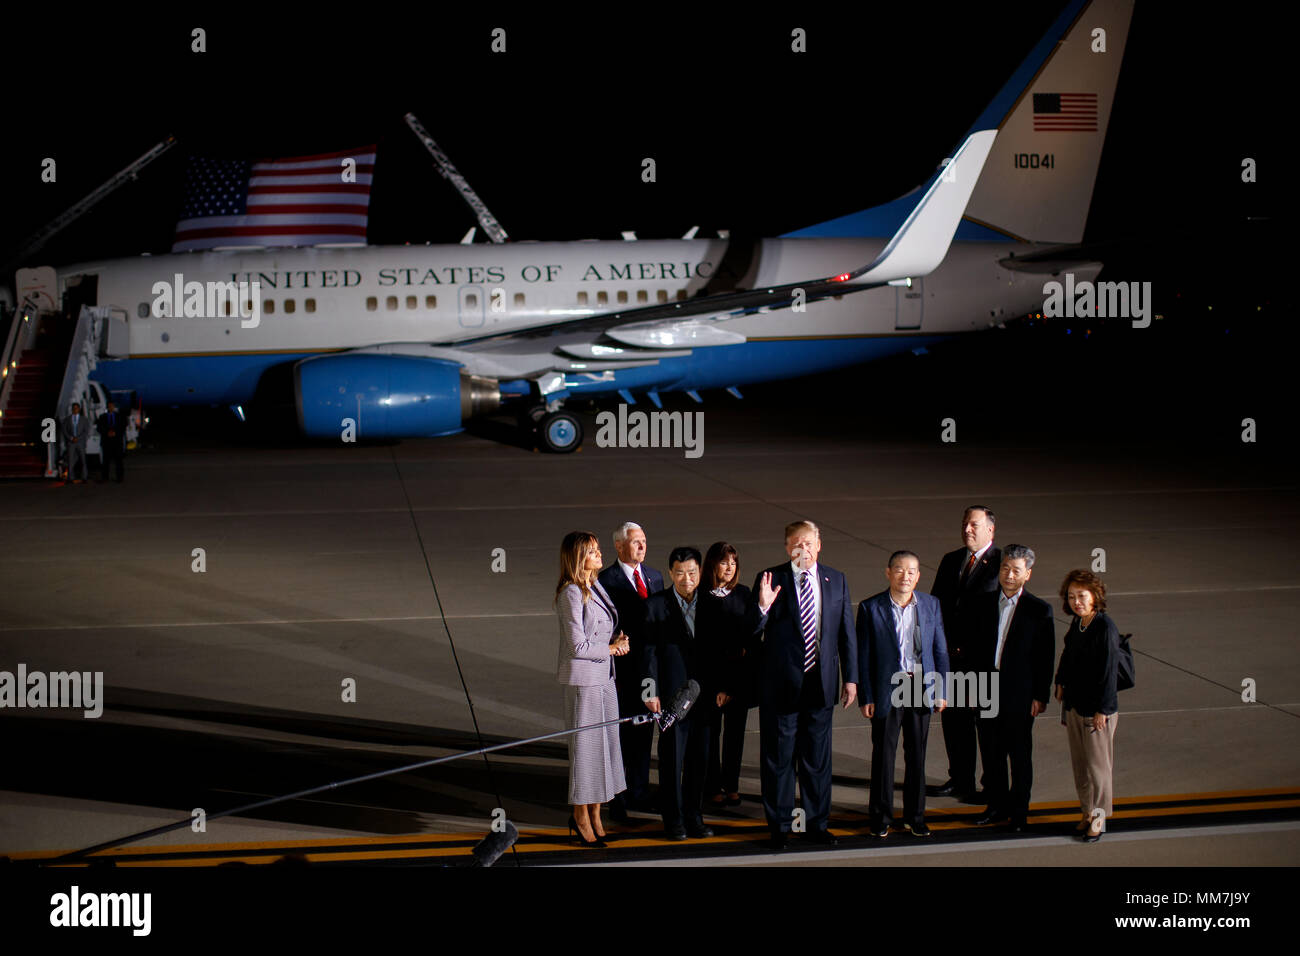 (180510) -- WASHINGTON D.C., May 10, 2018 (Xinhua) -- U.S. President Donald Trump (5th L), his wife Melania Trump (1st L), Vice President Mike Pence (2nd L), Secretary of State Mike Pompeo (3rd R) welcome three detainees back to the United States at Joint Base Andrews in Washington, DC, the United States, May 10, 2018. Three U.S. citizens that were just freed by the Democratic People's Republic of Korea (DPRK) arrived in Washington early Thursday, as the two countries saw their ties warm up in recent weeks. The three detainees, named Kim Hak-song, Tony Kim, Kim Dong-chul, are all U.S. citizen Stock Photo